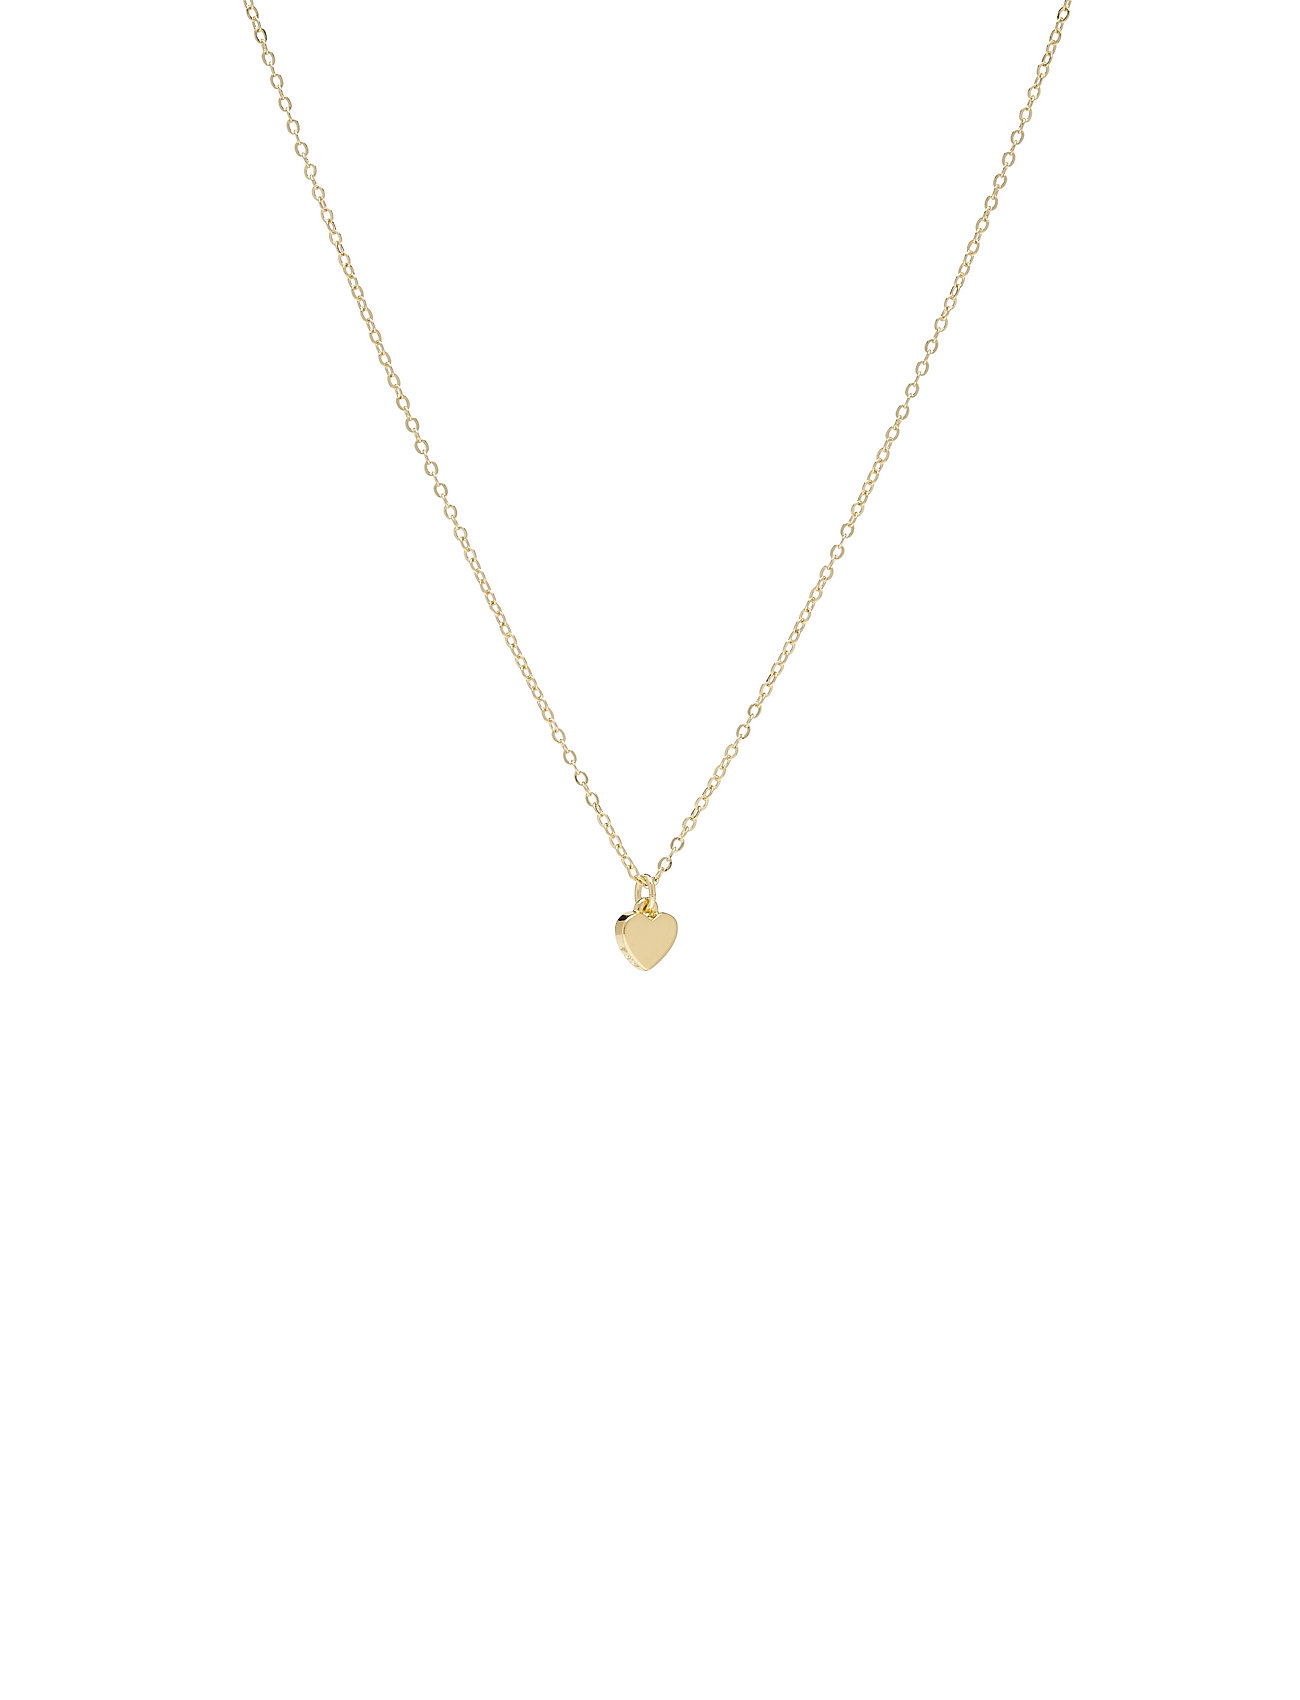 Hara Accessories Jewellery Necklaces Dainty Necklaces Kulta Ted Baker